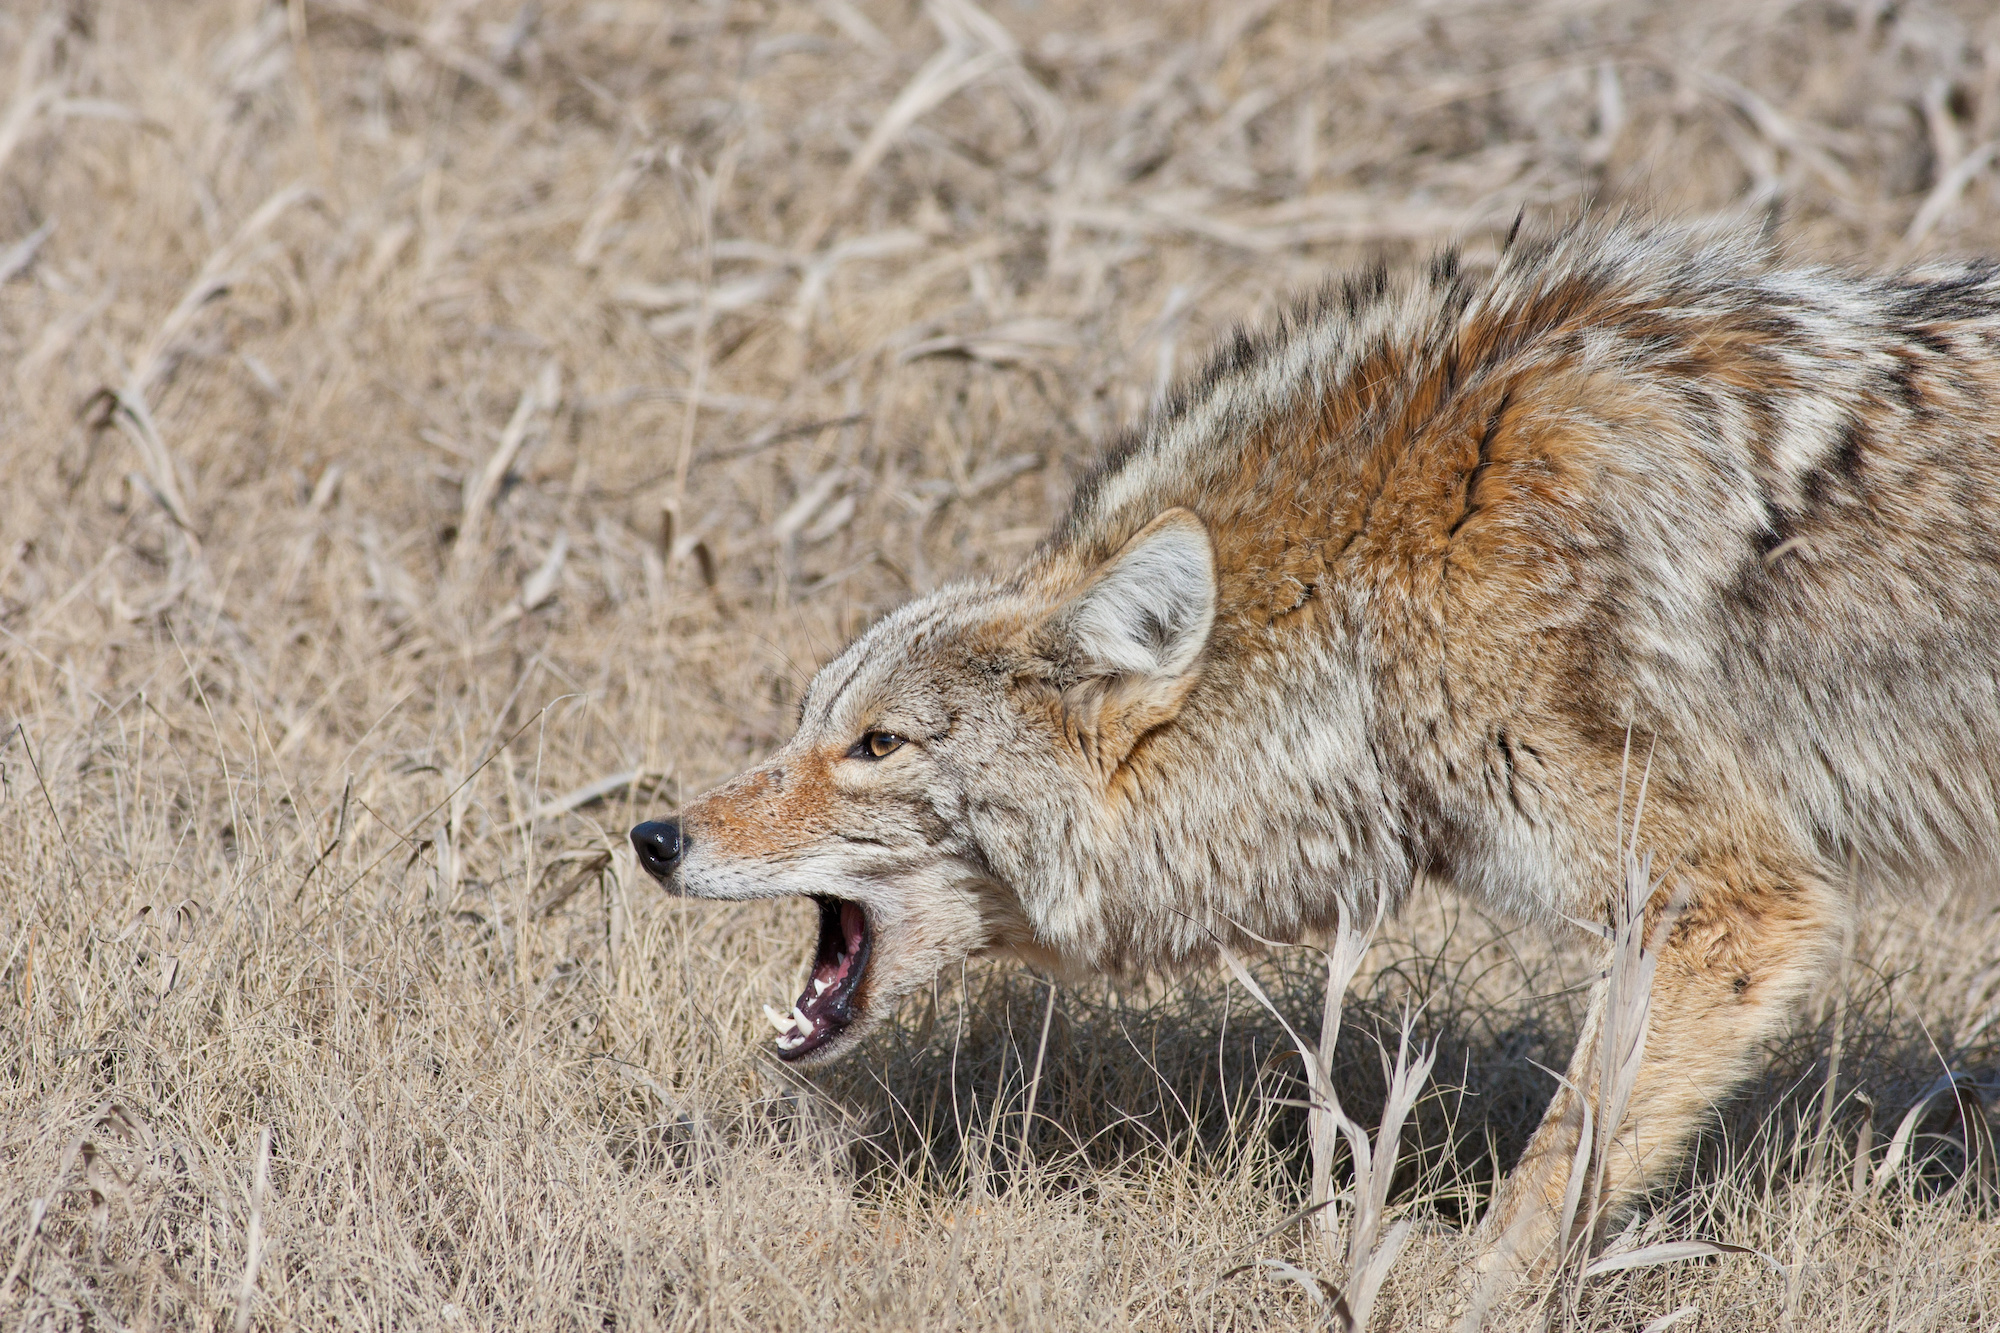 Coyote attacks on humans are rare.